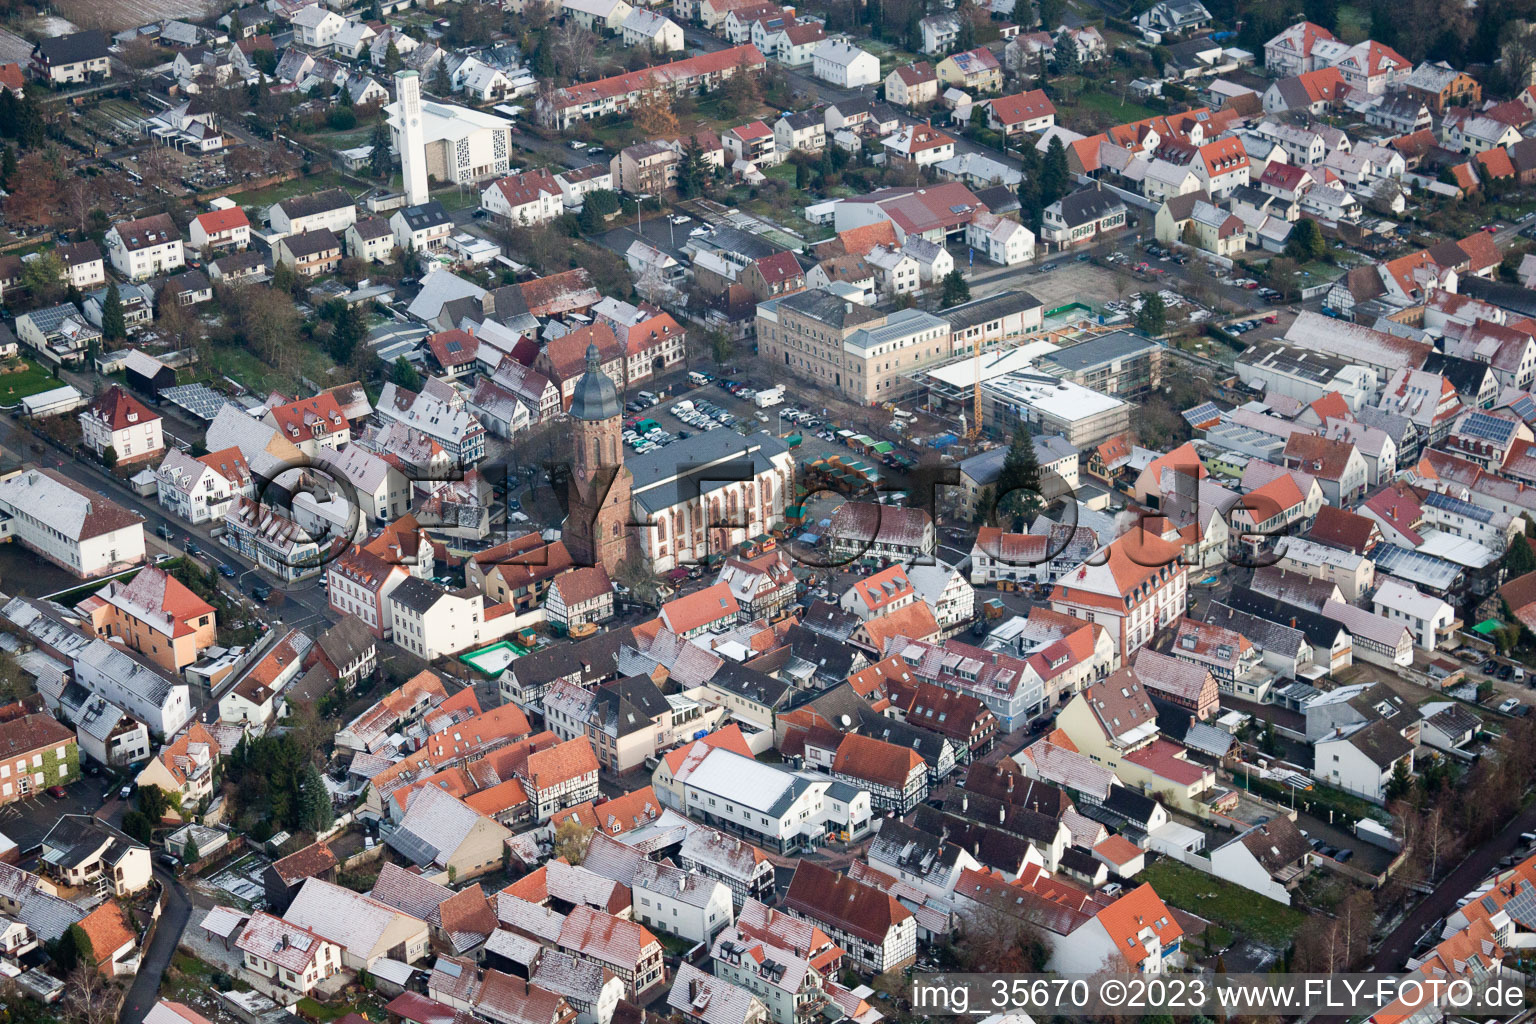 Aerial view of Marketplace in Kandel in the state Rhineland-Palatinate, Germany